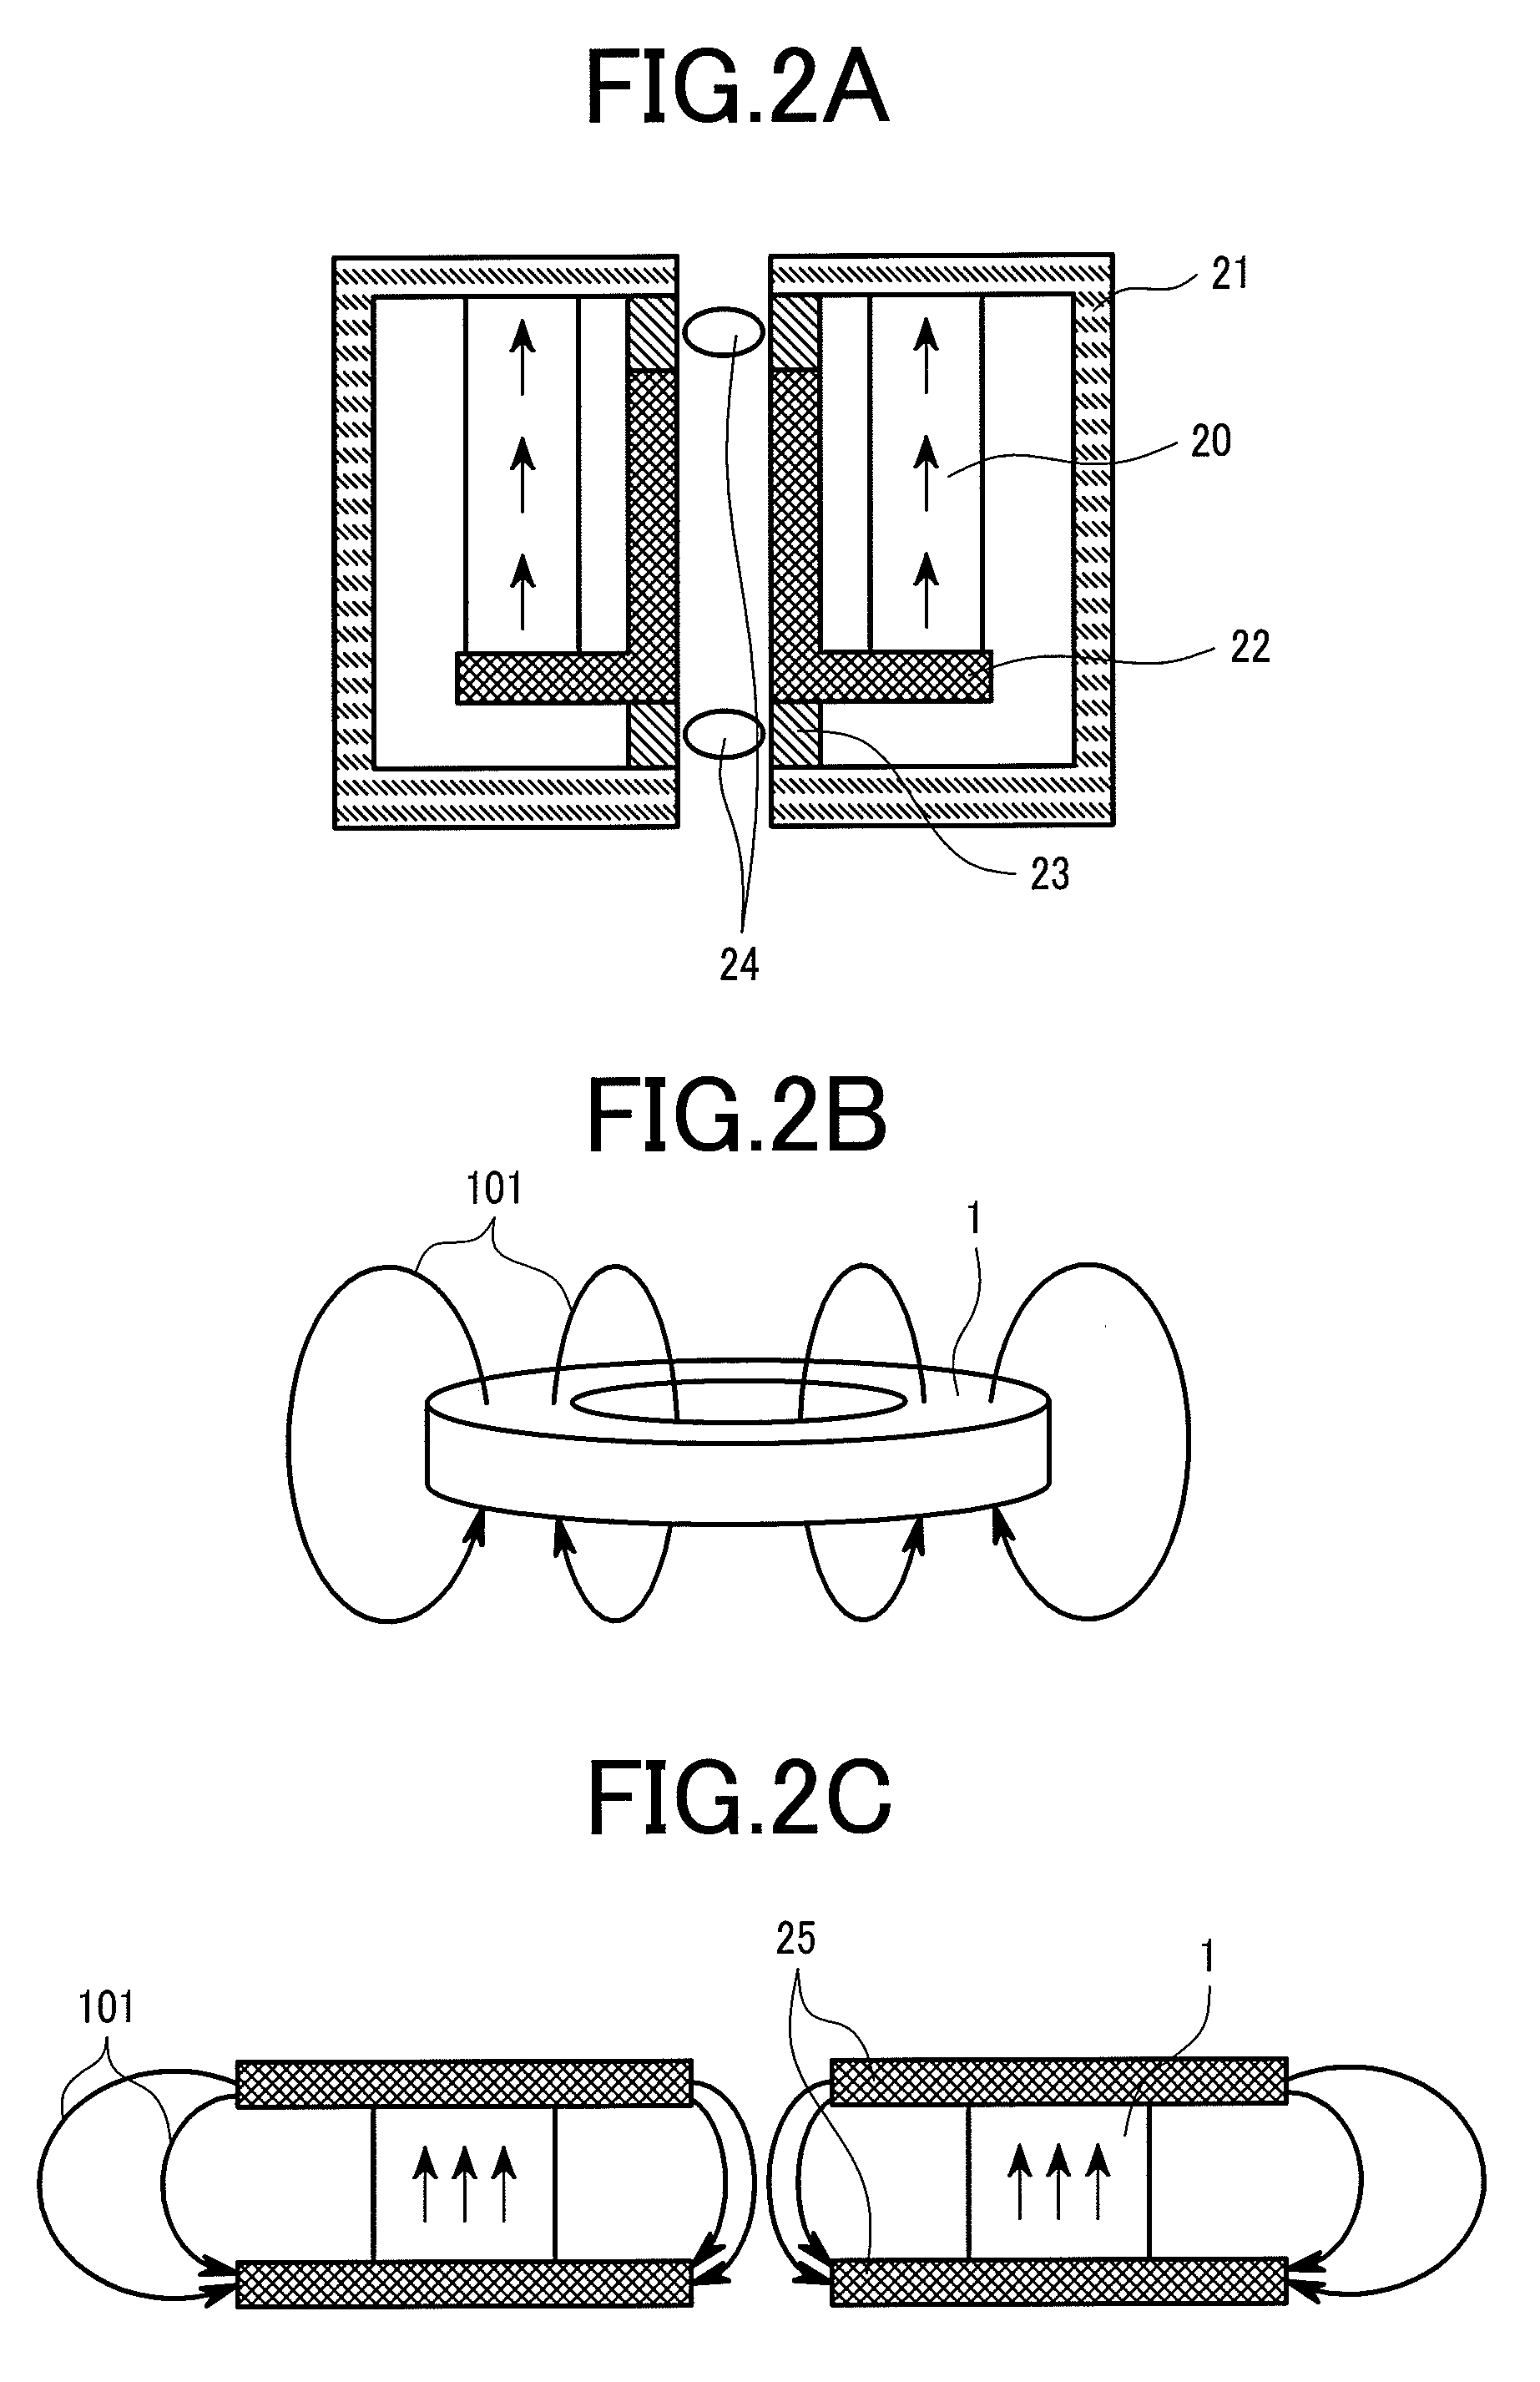 Electron Lens and Charged Particle Beam Apparatus